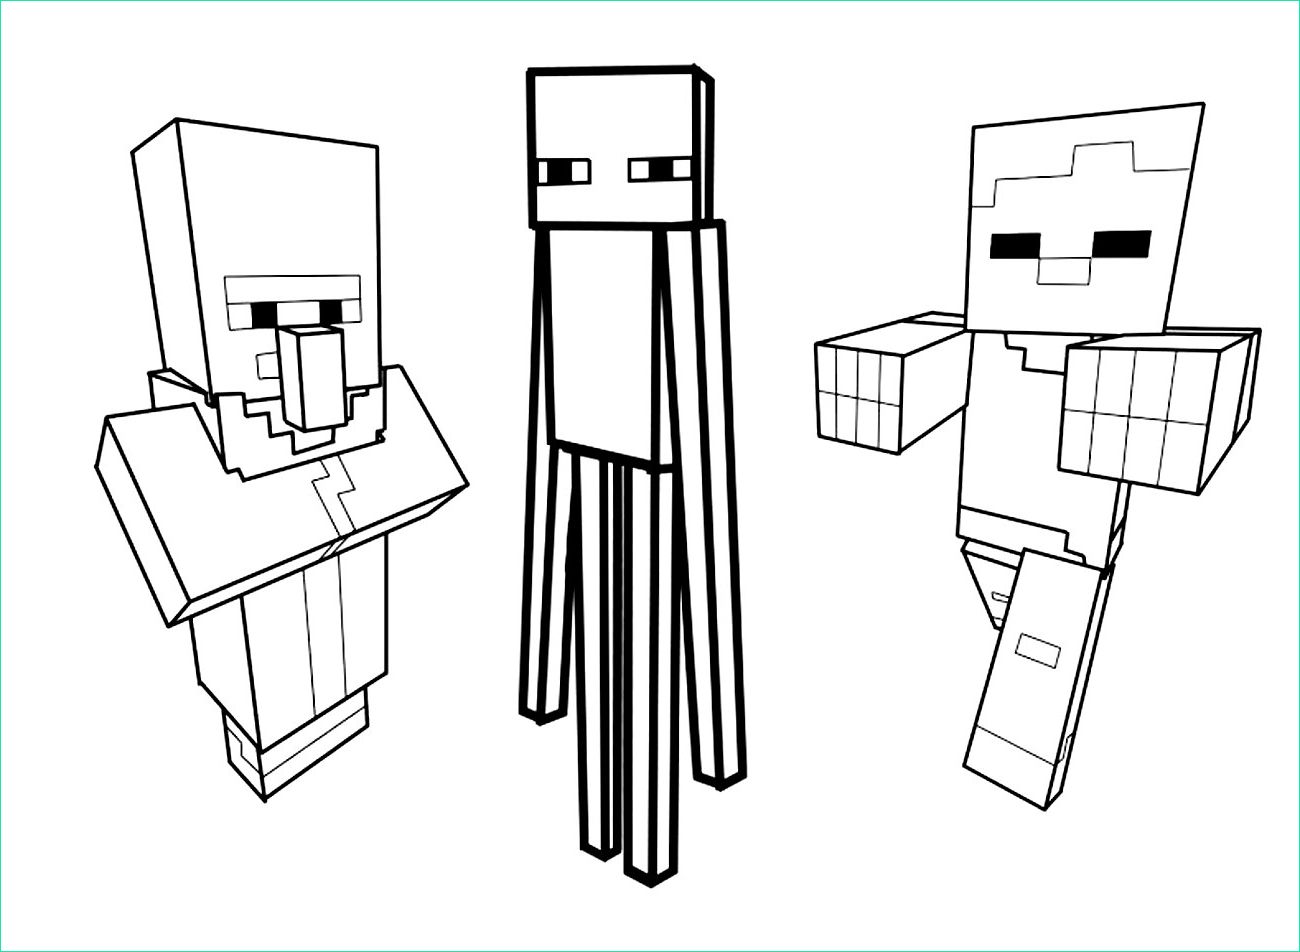 image=kids minecraft coloring page drawing inspired by minecraft 5 1